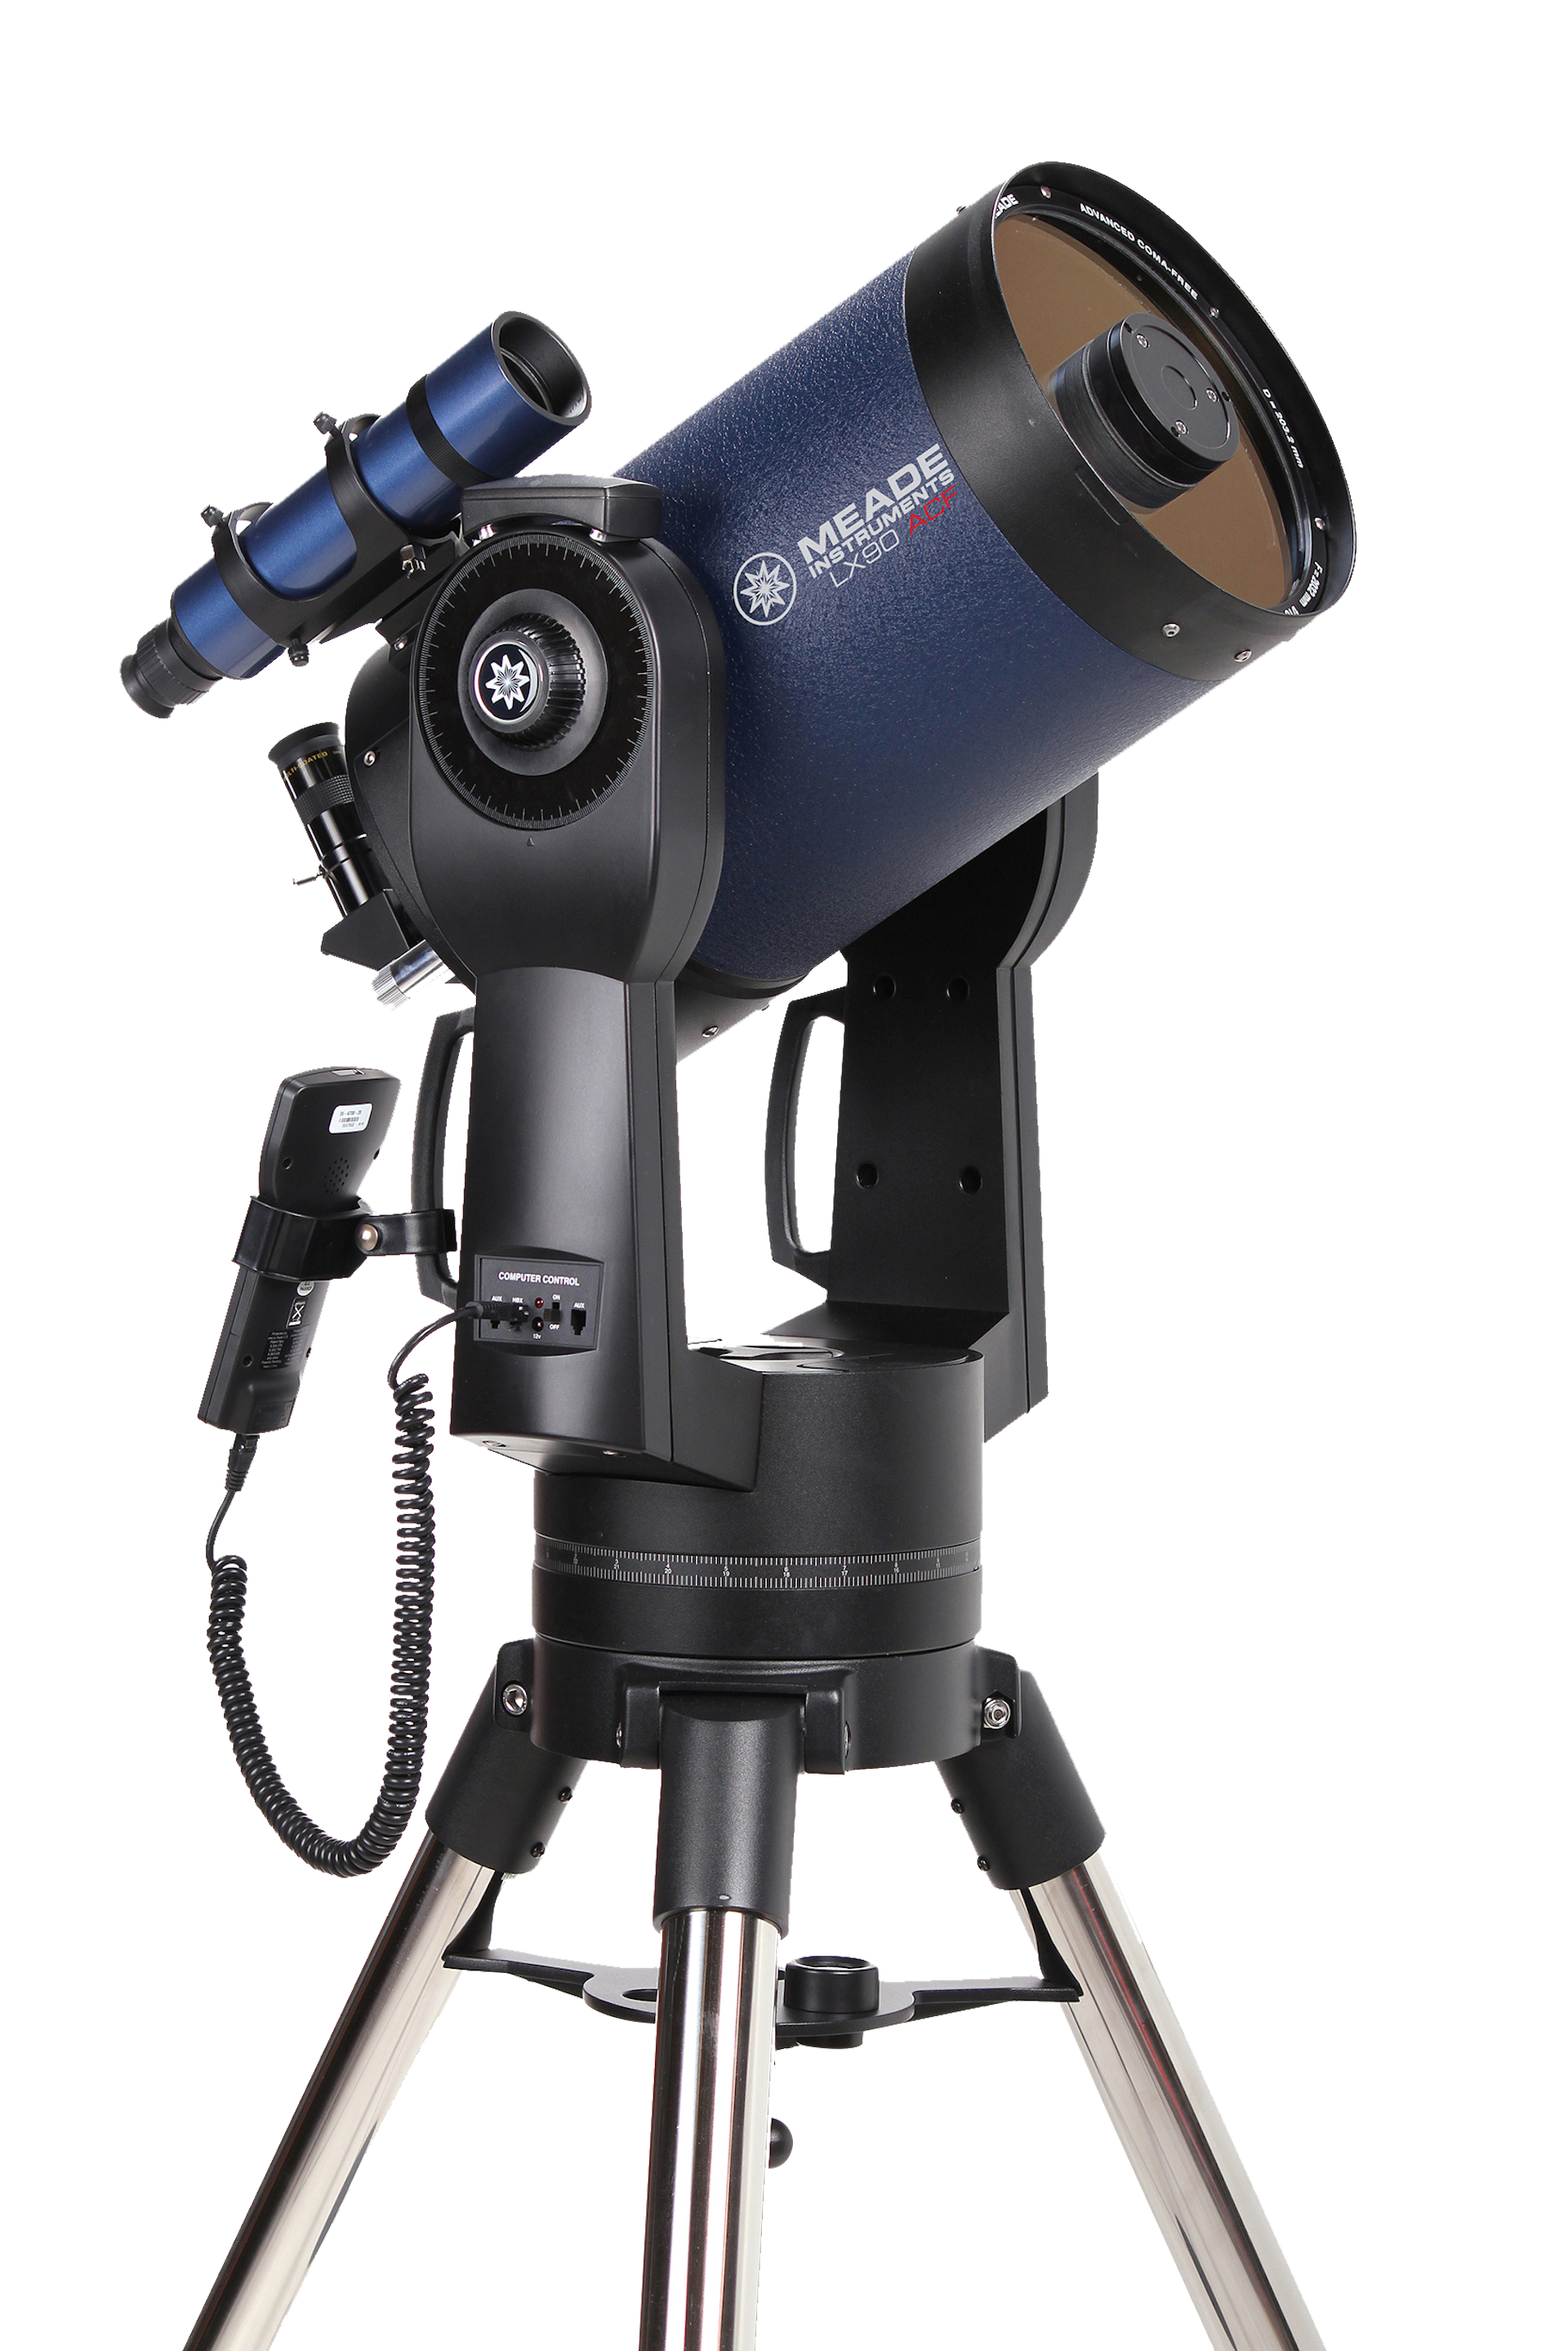 telescopes for sale in stores